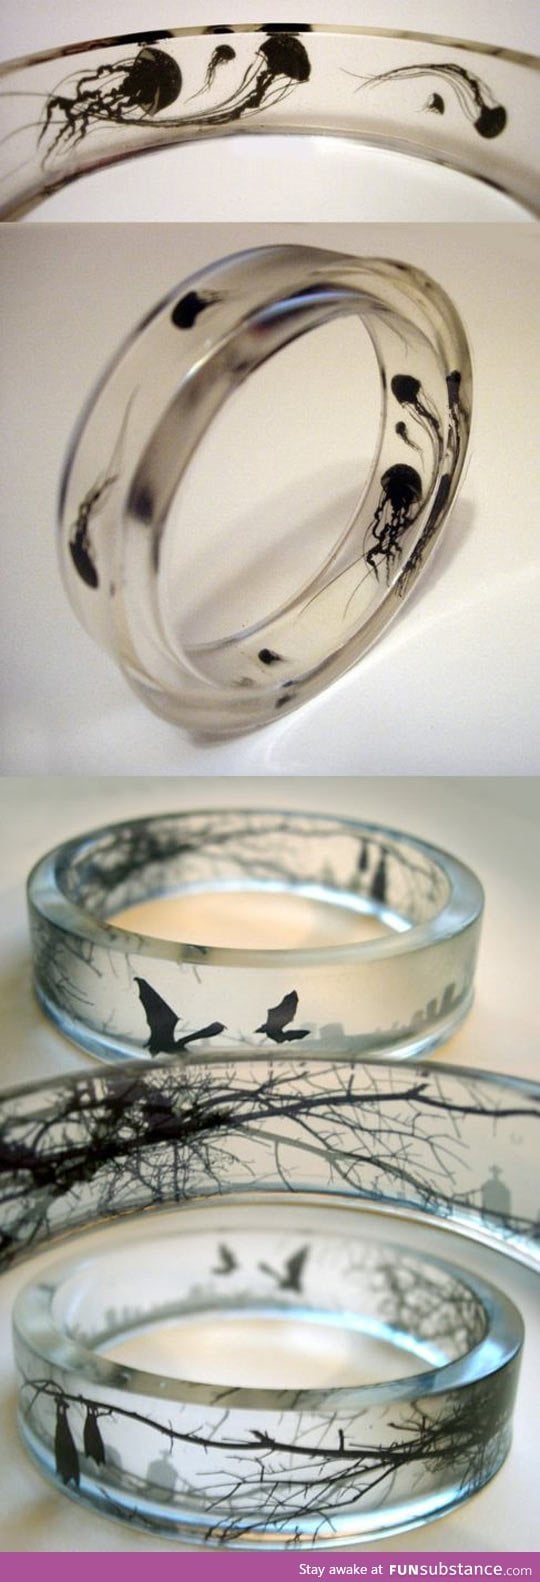 These rings are very cool